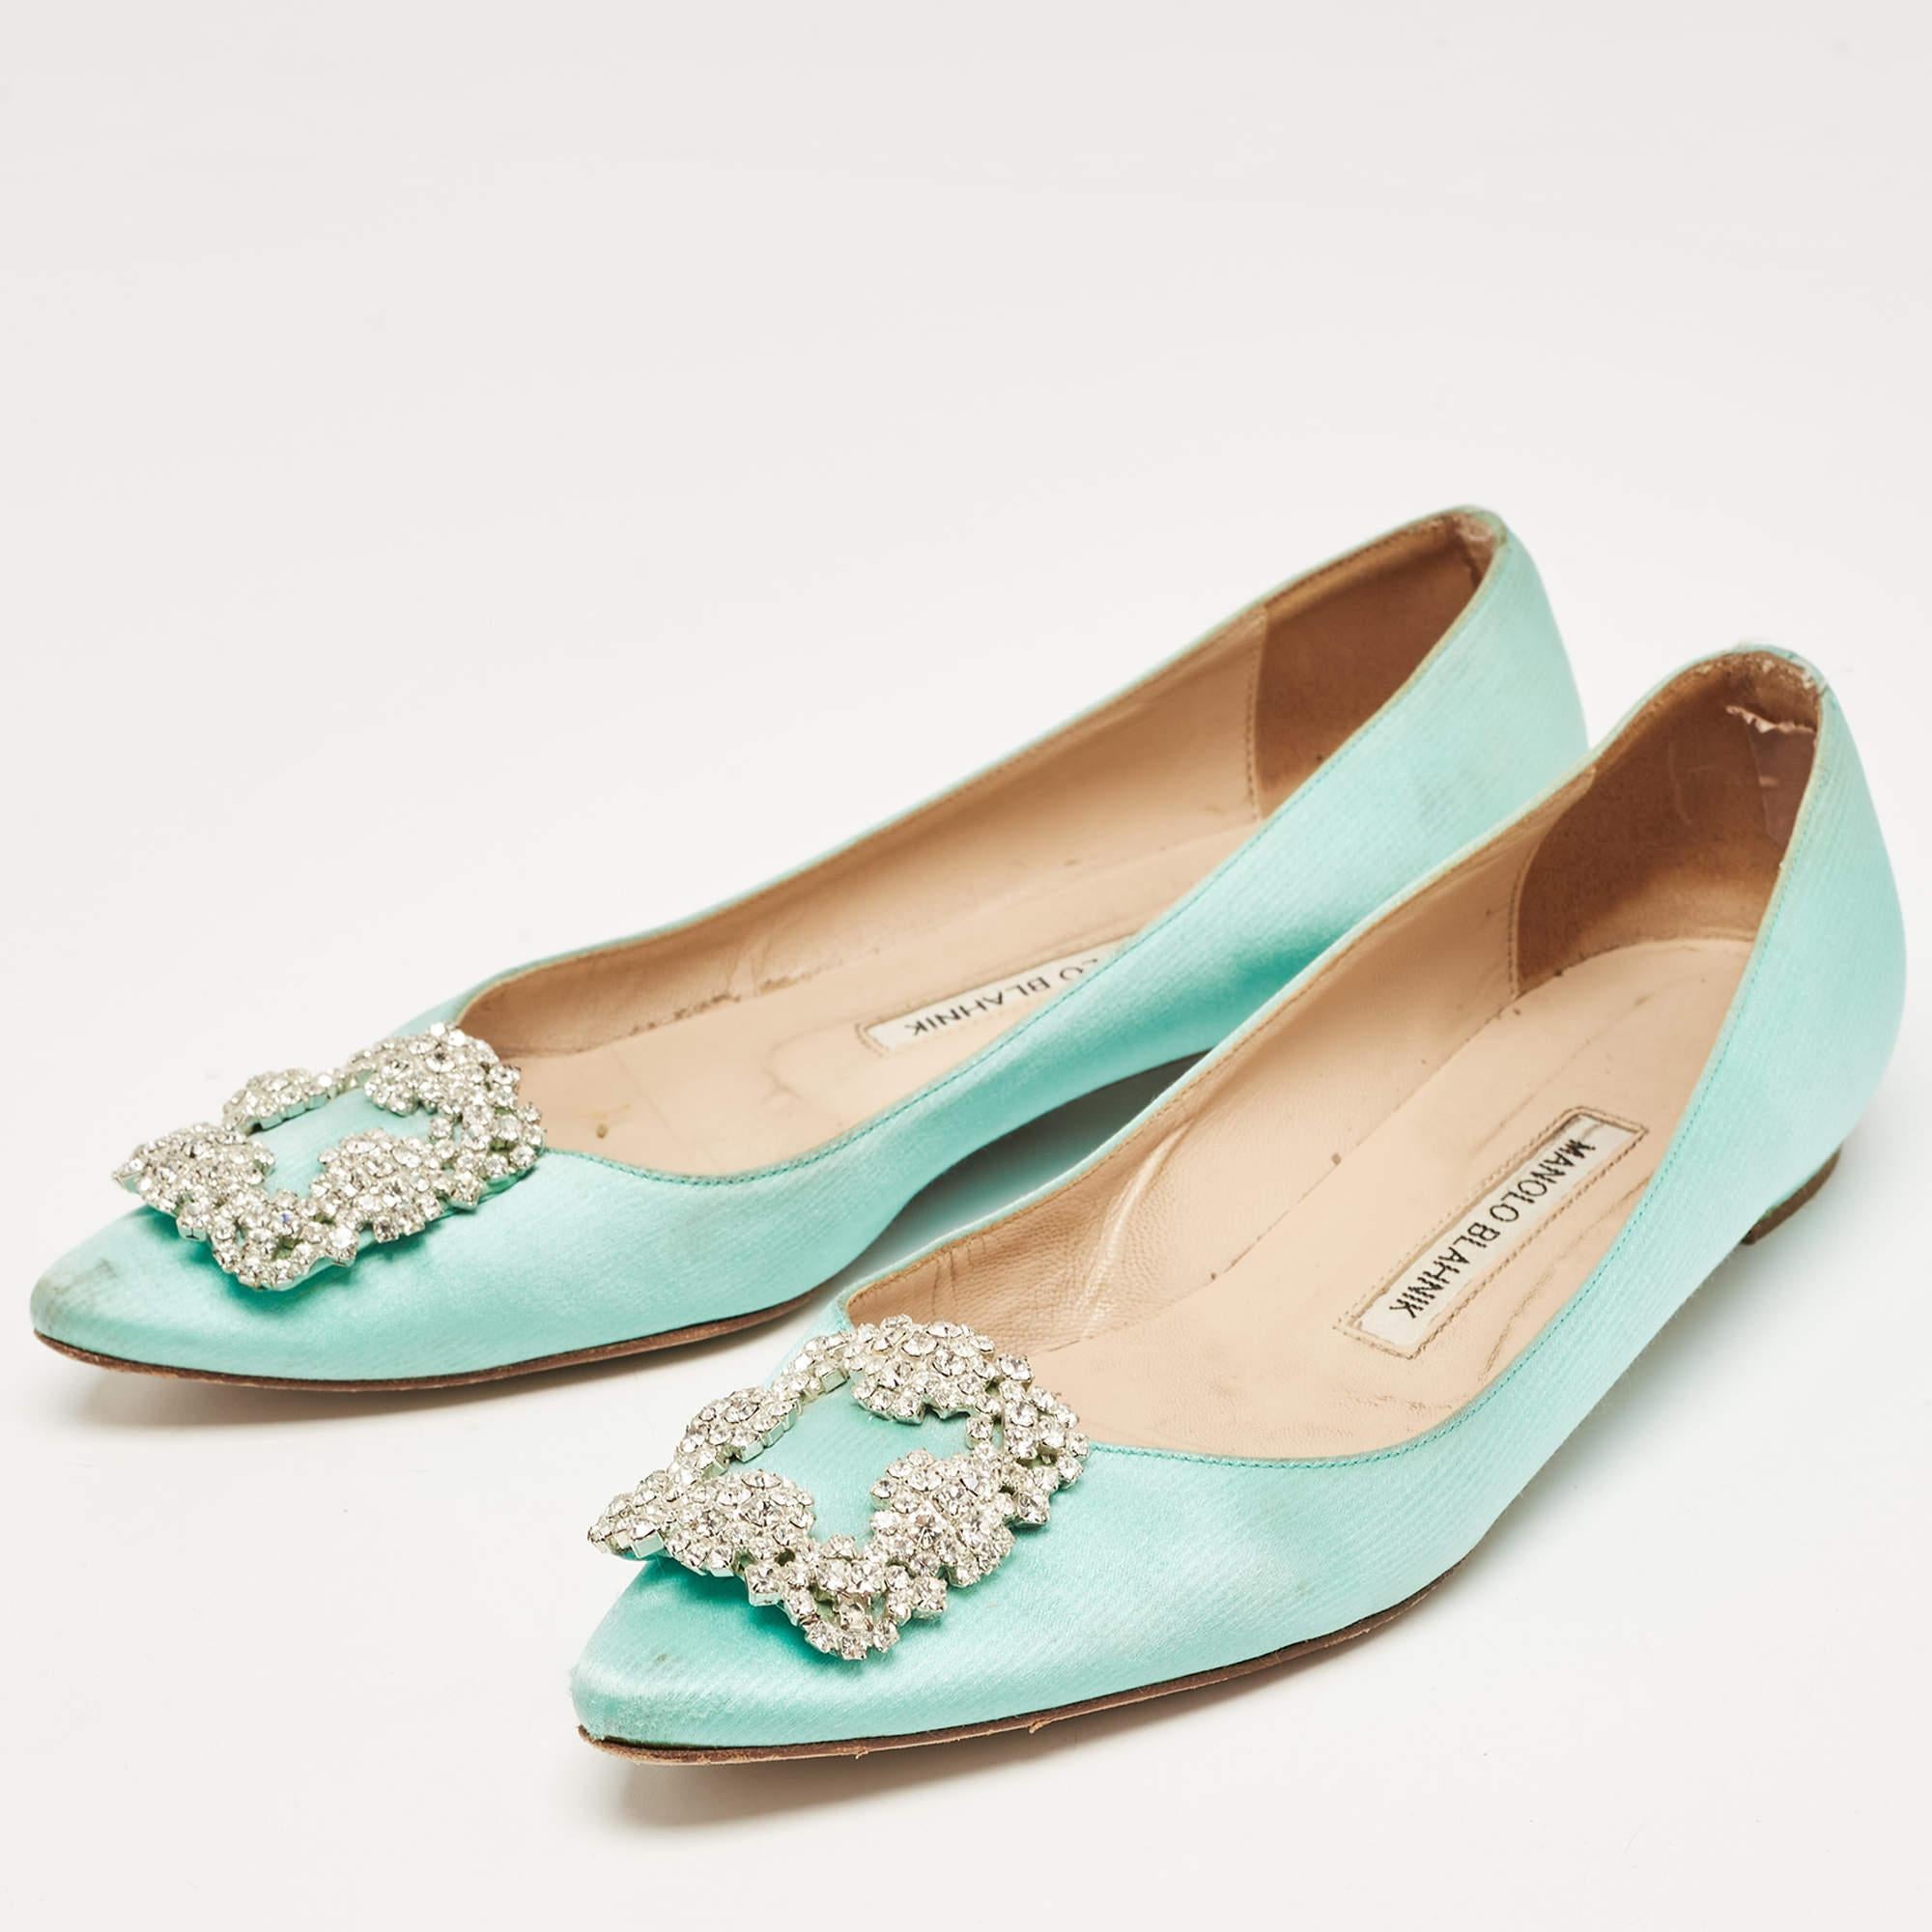 Let this comfortable pair be your first choice when you're out for a long day. These Manolo Blahnik flats have well-sewn uppers beautifully set on durable soles.

